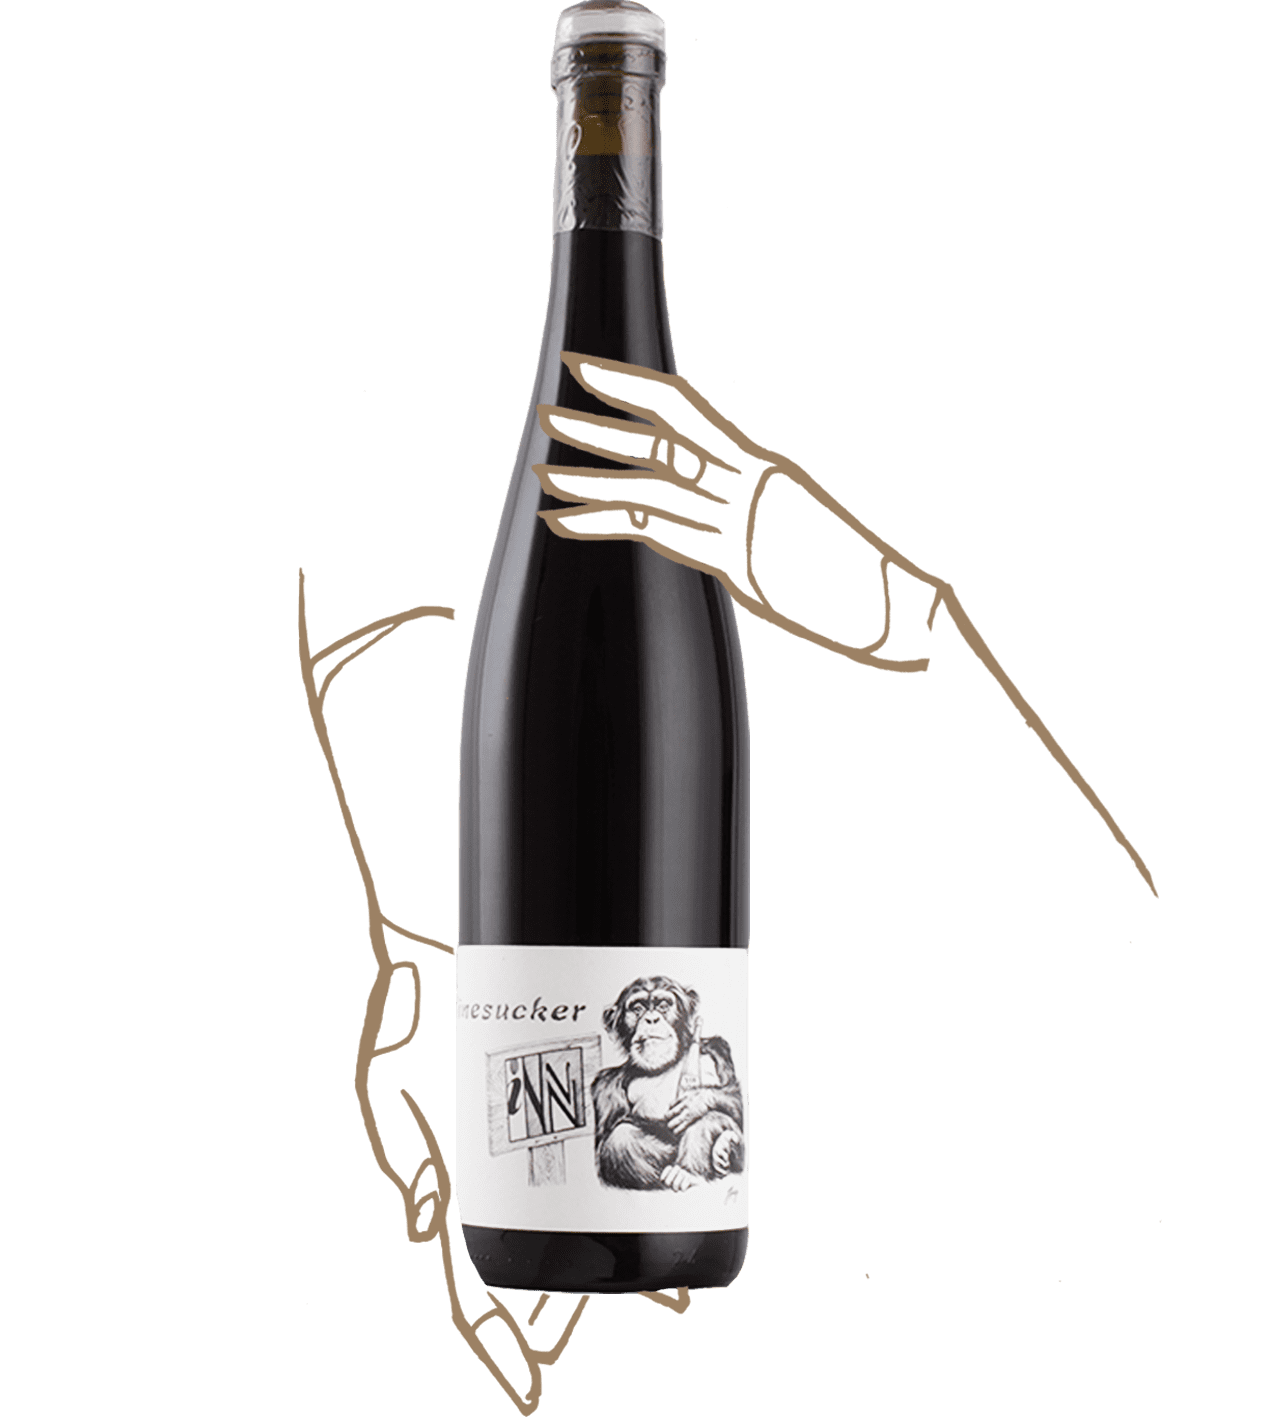 A pinot noir by winesucker and les vins pirouettes, a natural wine from Alsace